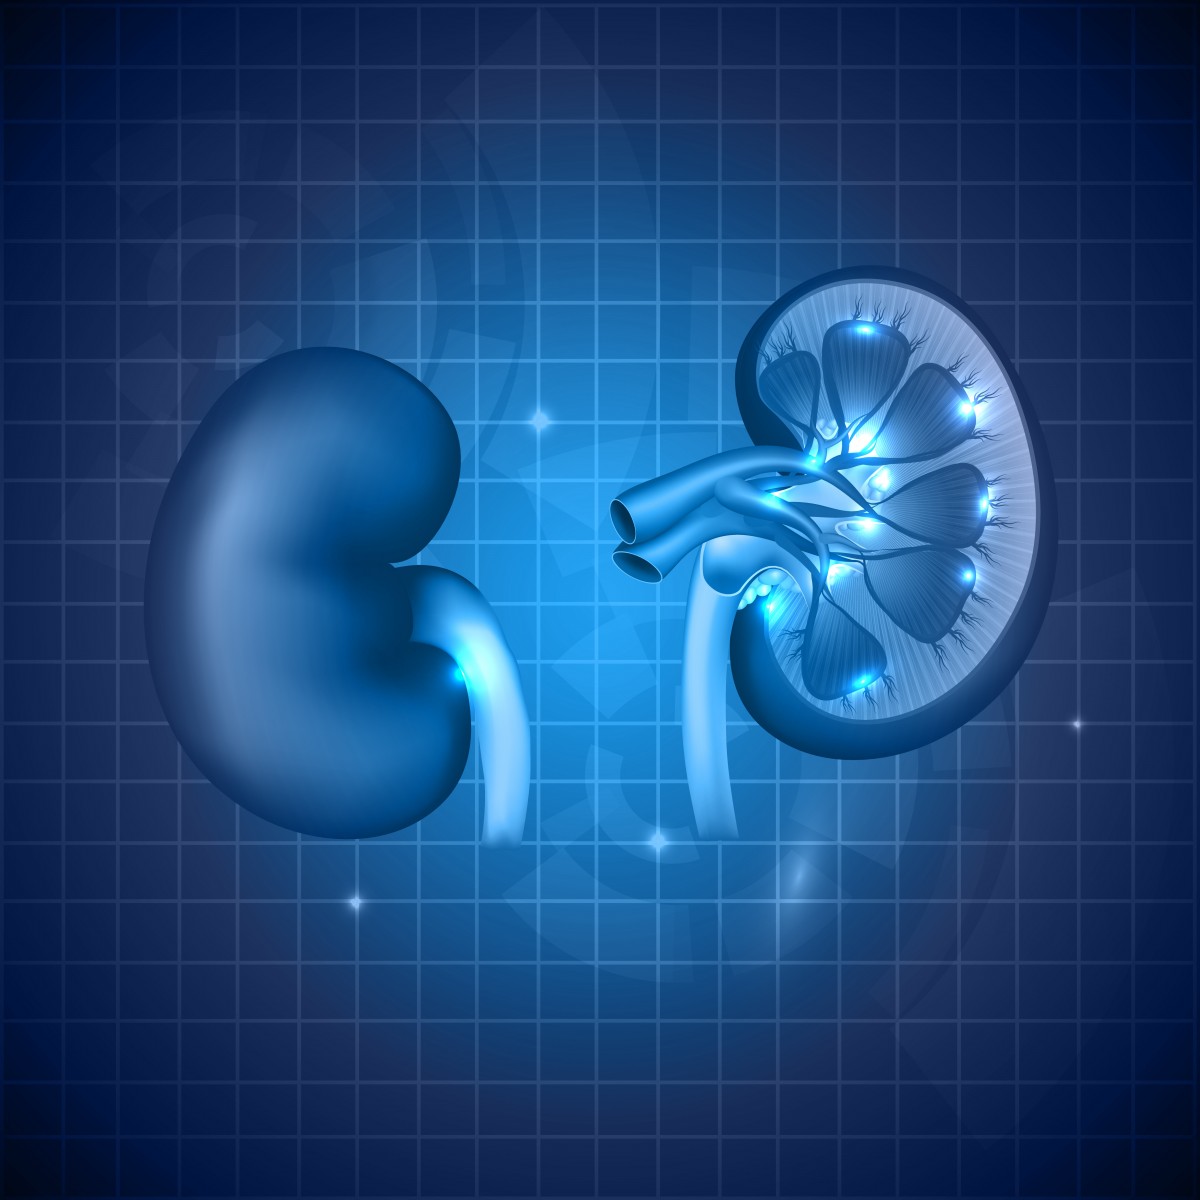 Argos’ Cell Immunotherapy Phase 3 Trial for Advanced Renal Cancer is Recruiting Patients